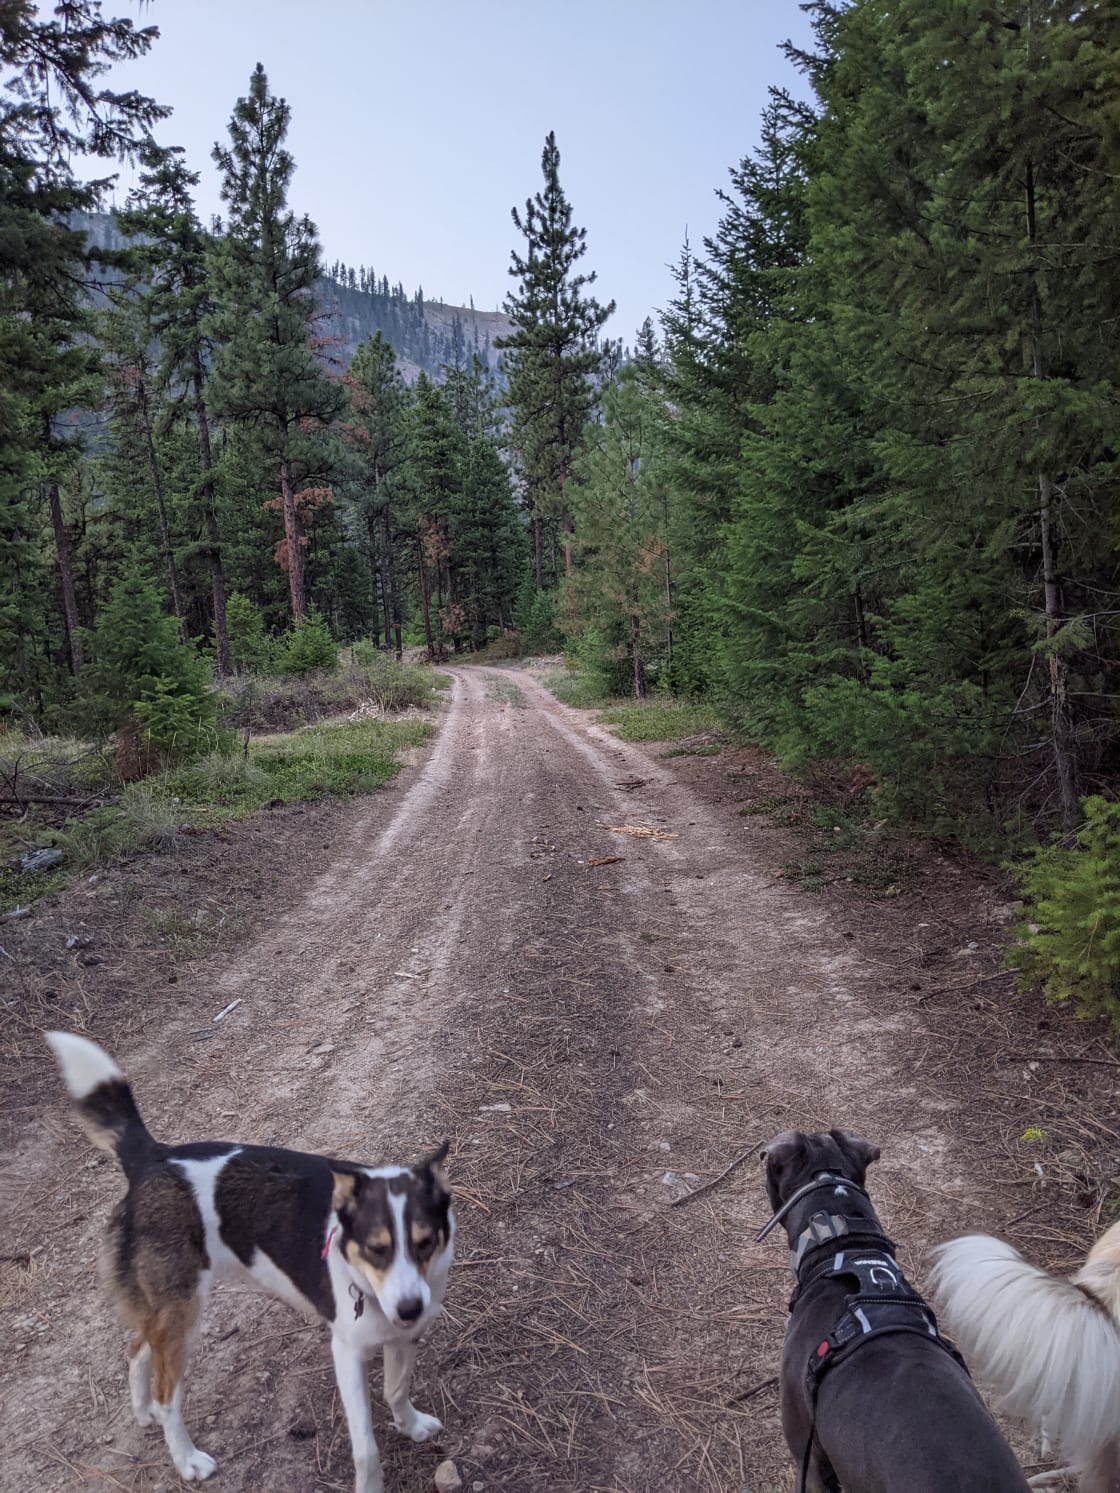 Our pups enjoying the fresh air and wonderful scenery.